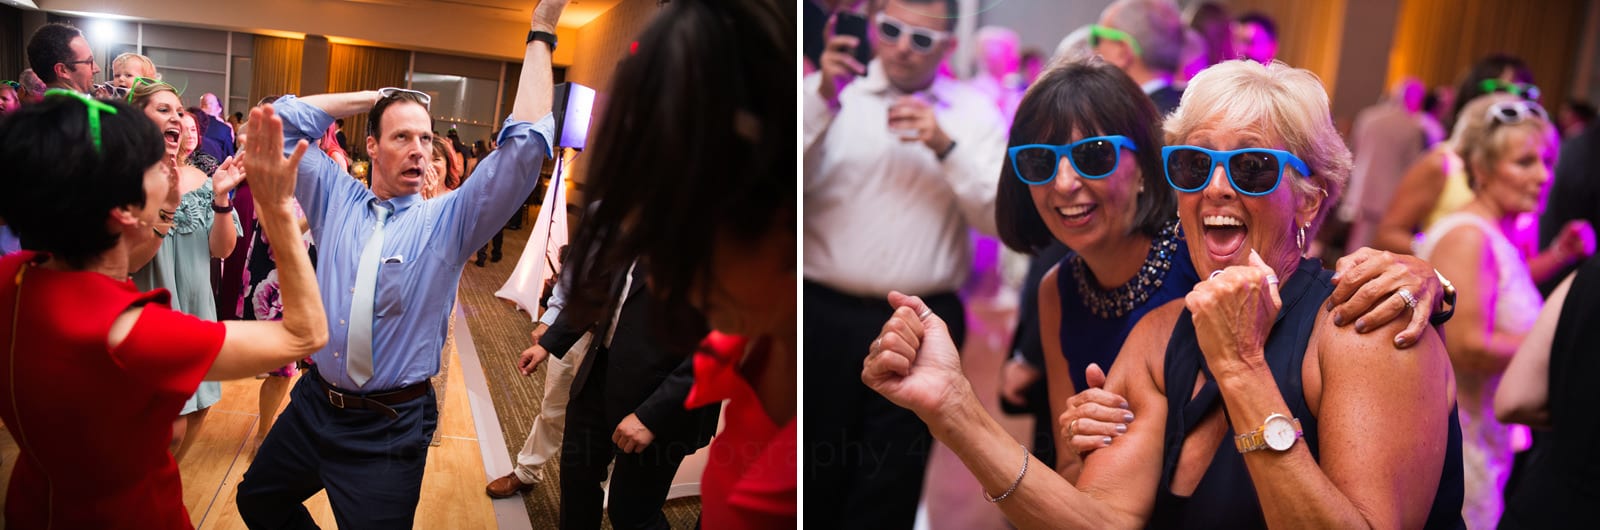 A man makes a funny face as he dances while waving his hand in the air. Two sunglass wearing women dance and smile during a Wedding Photography at Fairmont Hotel Pittsburgh.